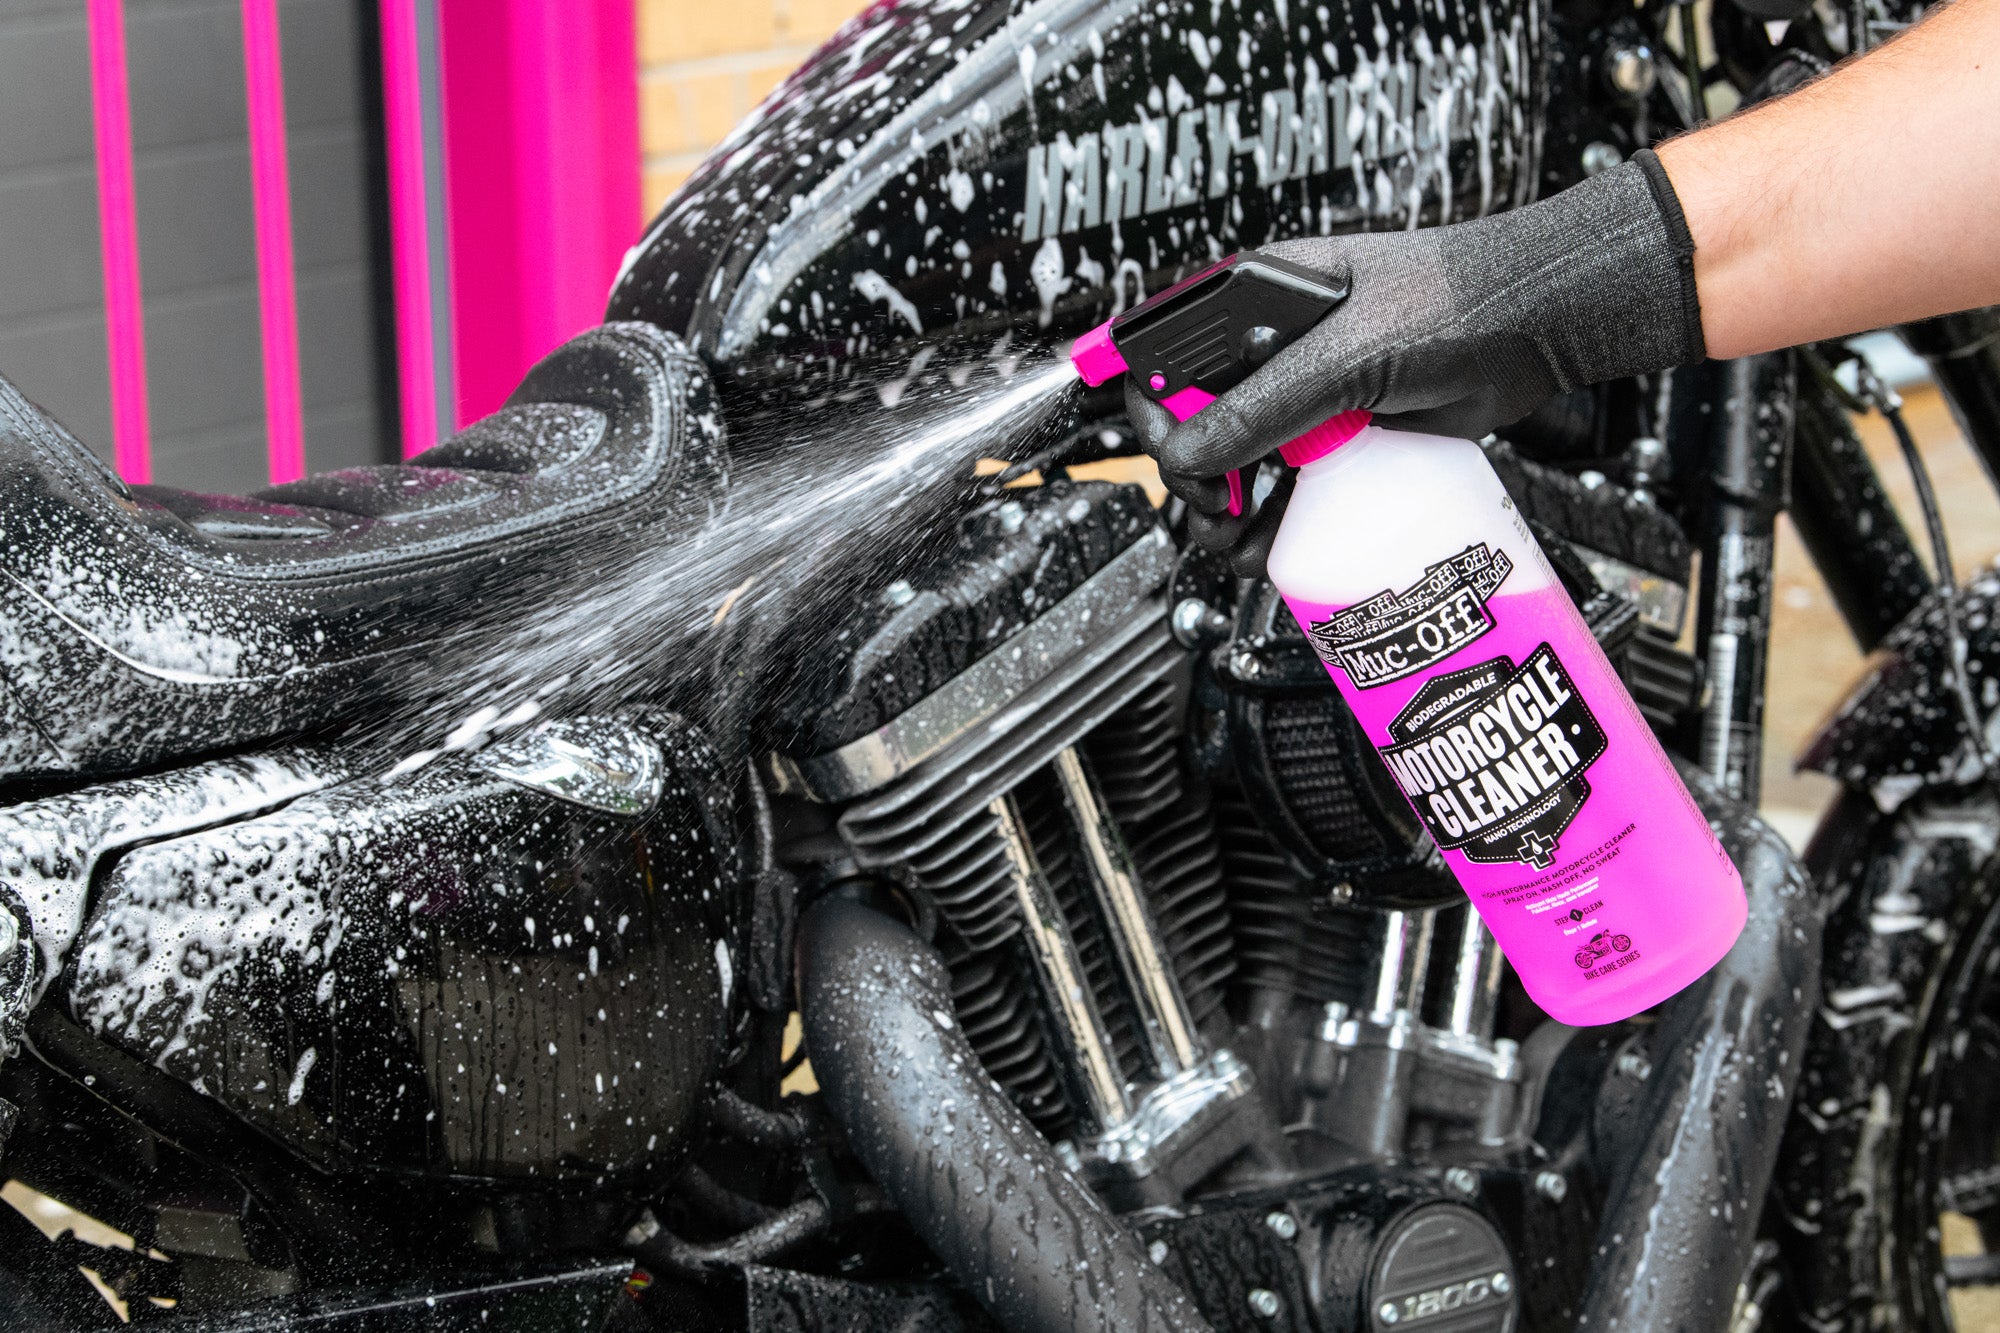 STRIKE HOLD: The BEST Cleaner, LUBRICANT, and PROTECTANT for your  MOTORCYCLE 